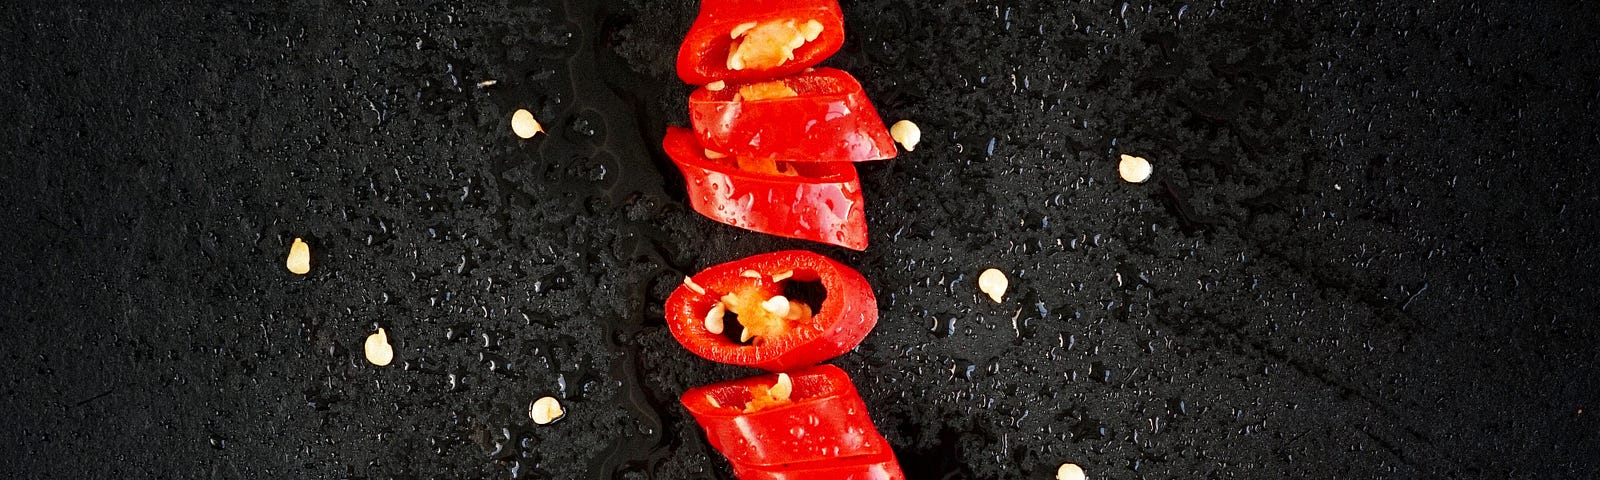 A red pepper, displayed vertically and cut multiple times horizontally.